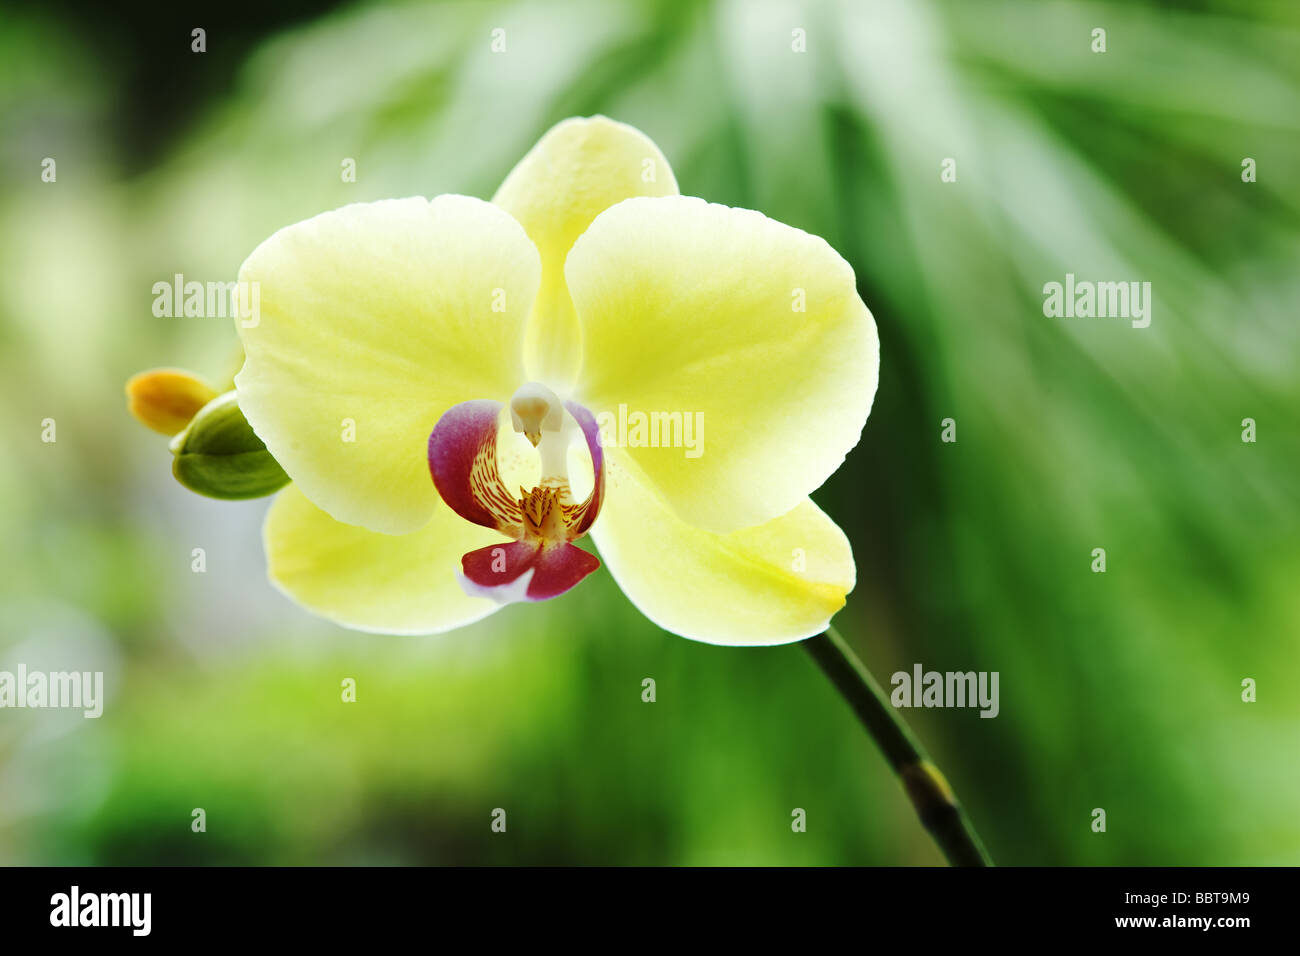 Yellow flower with red pistil Stock Photo